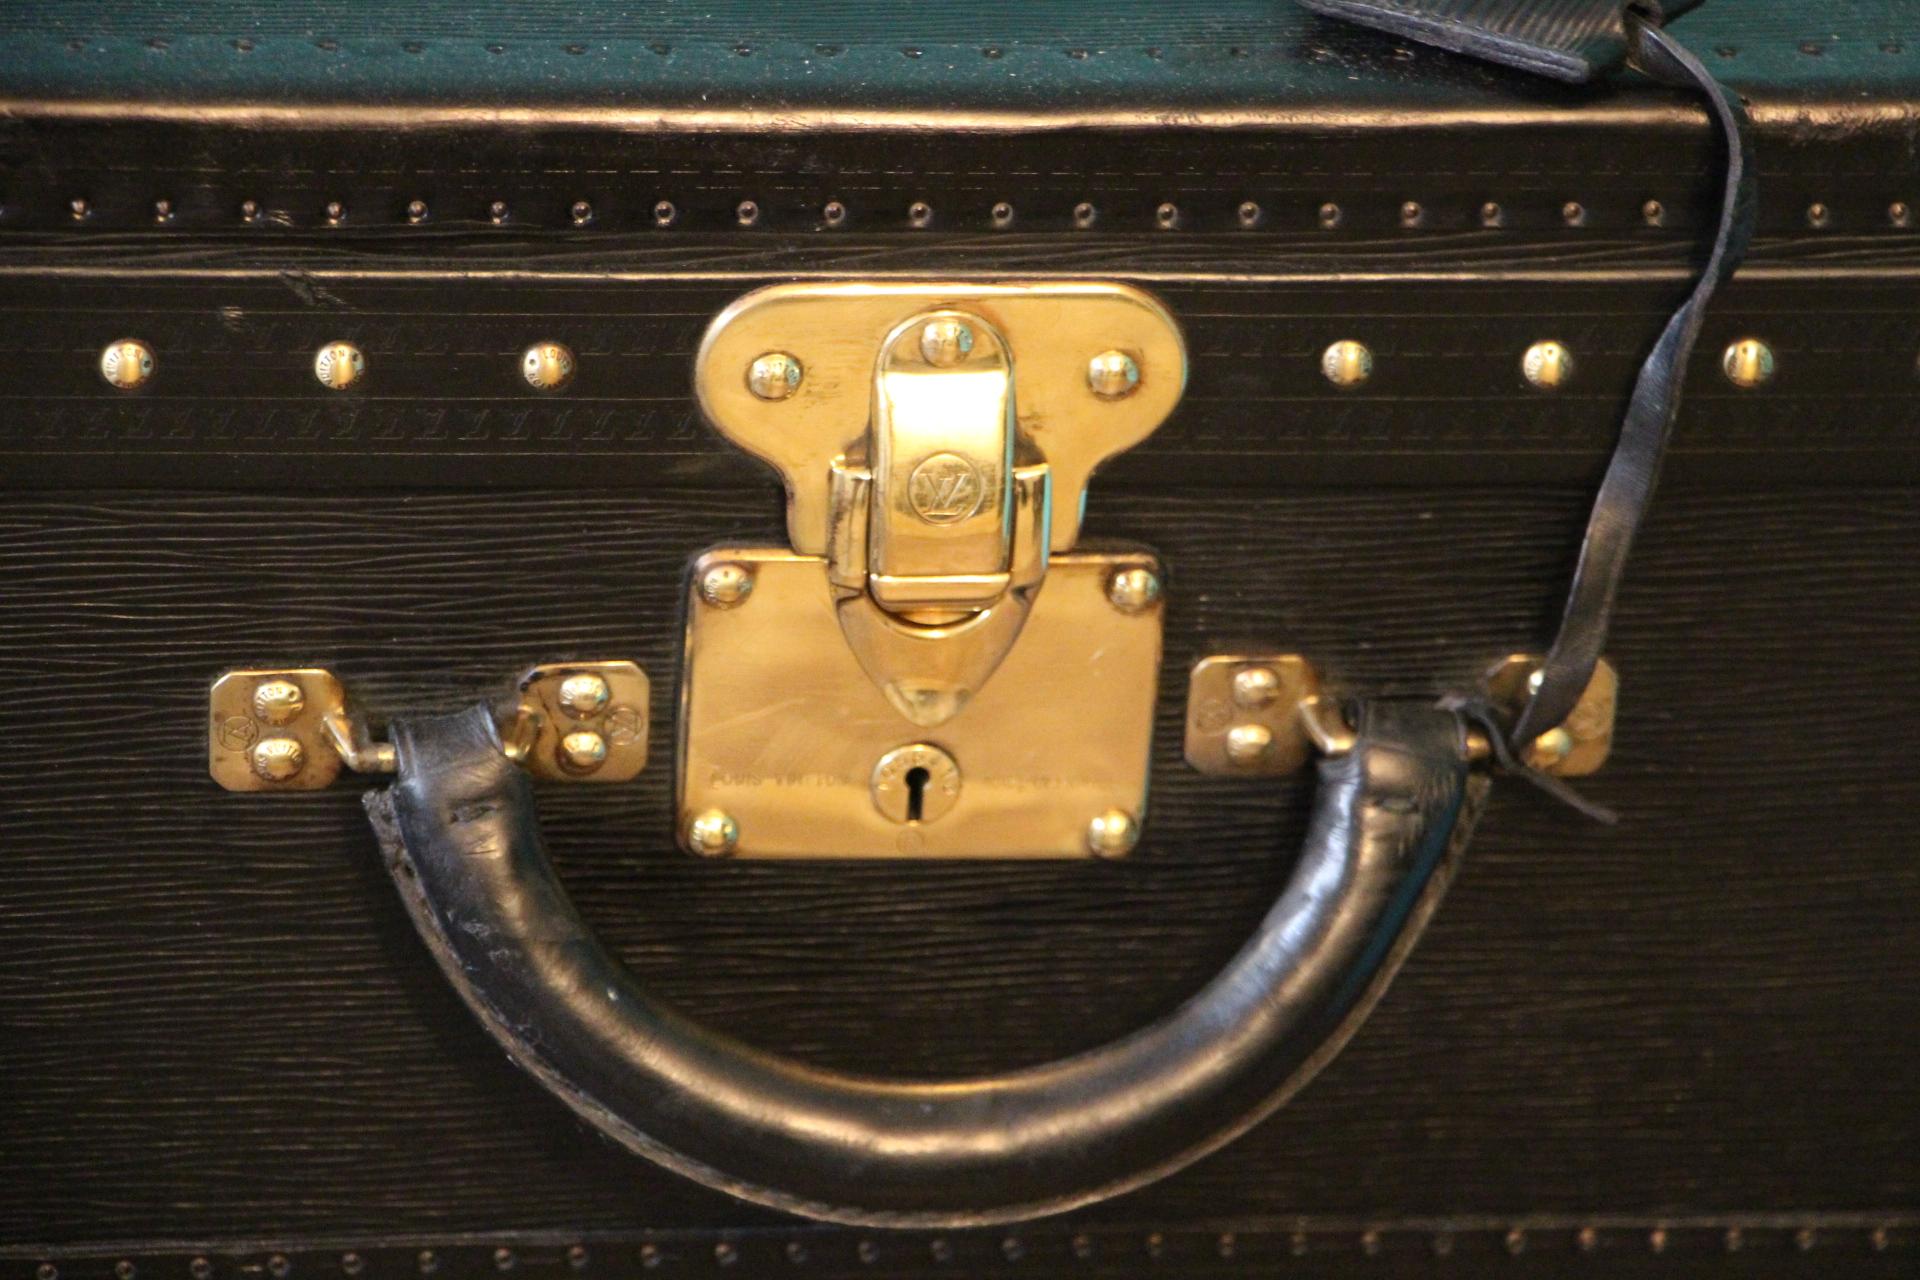 This top of the range all black leather Alzer 80 rigid suitcase features black leather trim, all solid brass LV stamped lock, clasps and studs. Large leather handle. 2 keys.
Its interior is in excellent condition, as new. It is lined in grey suede,